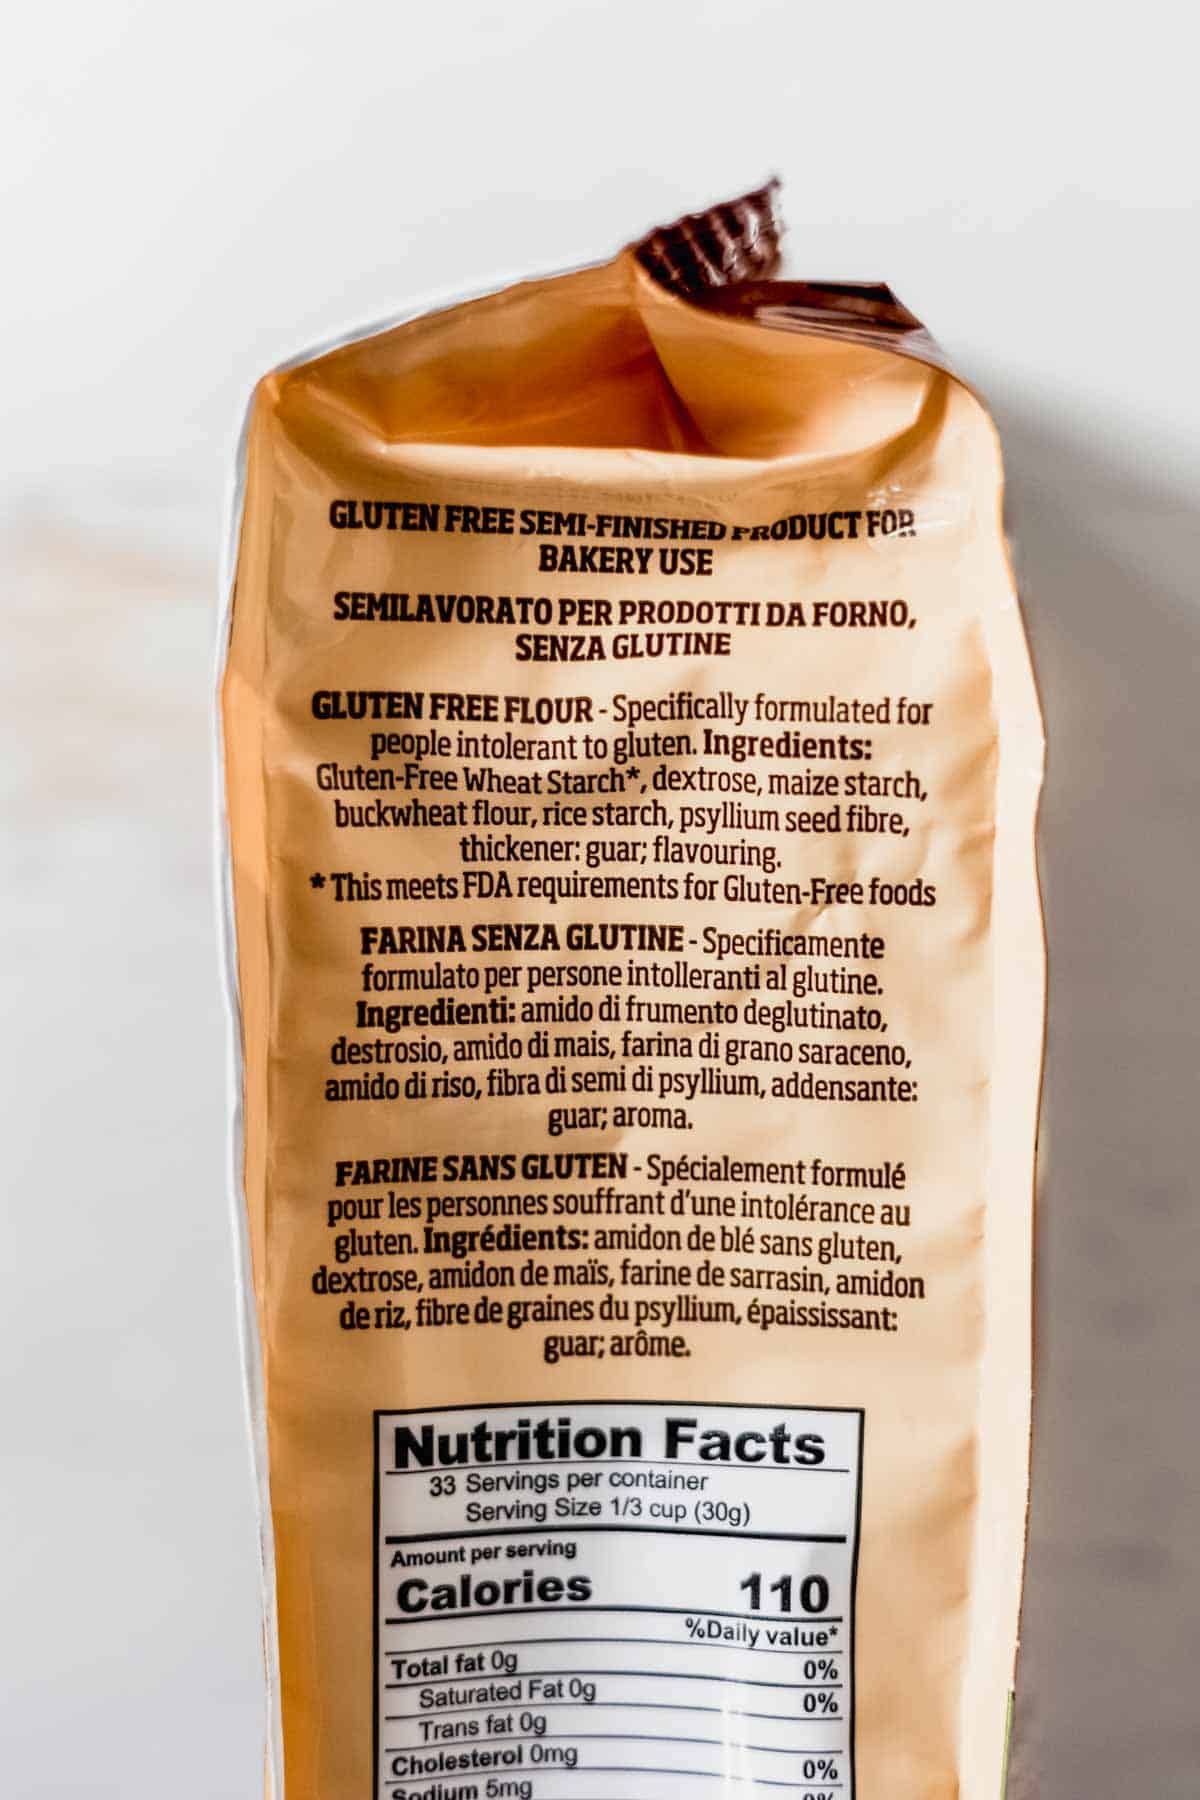 Side of Caputo Fioreglut bag showing list of ingredients.